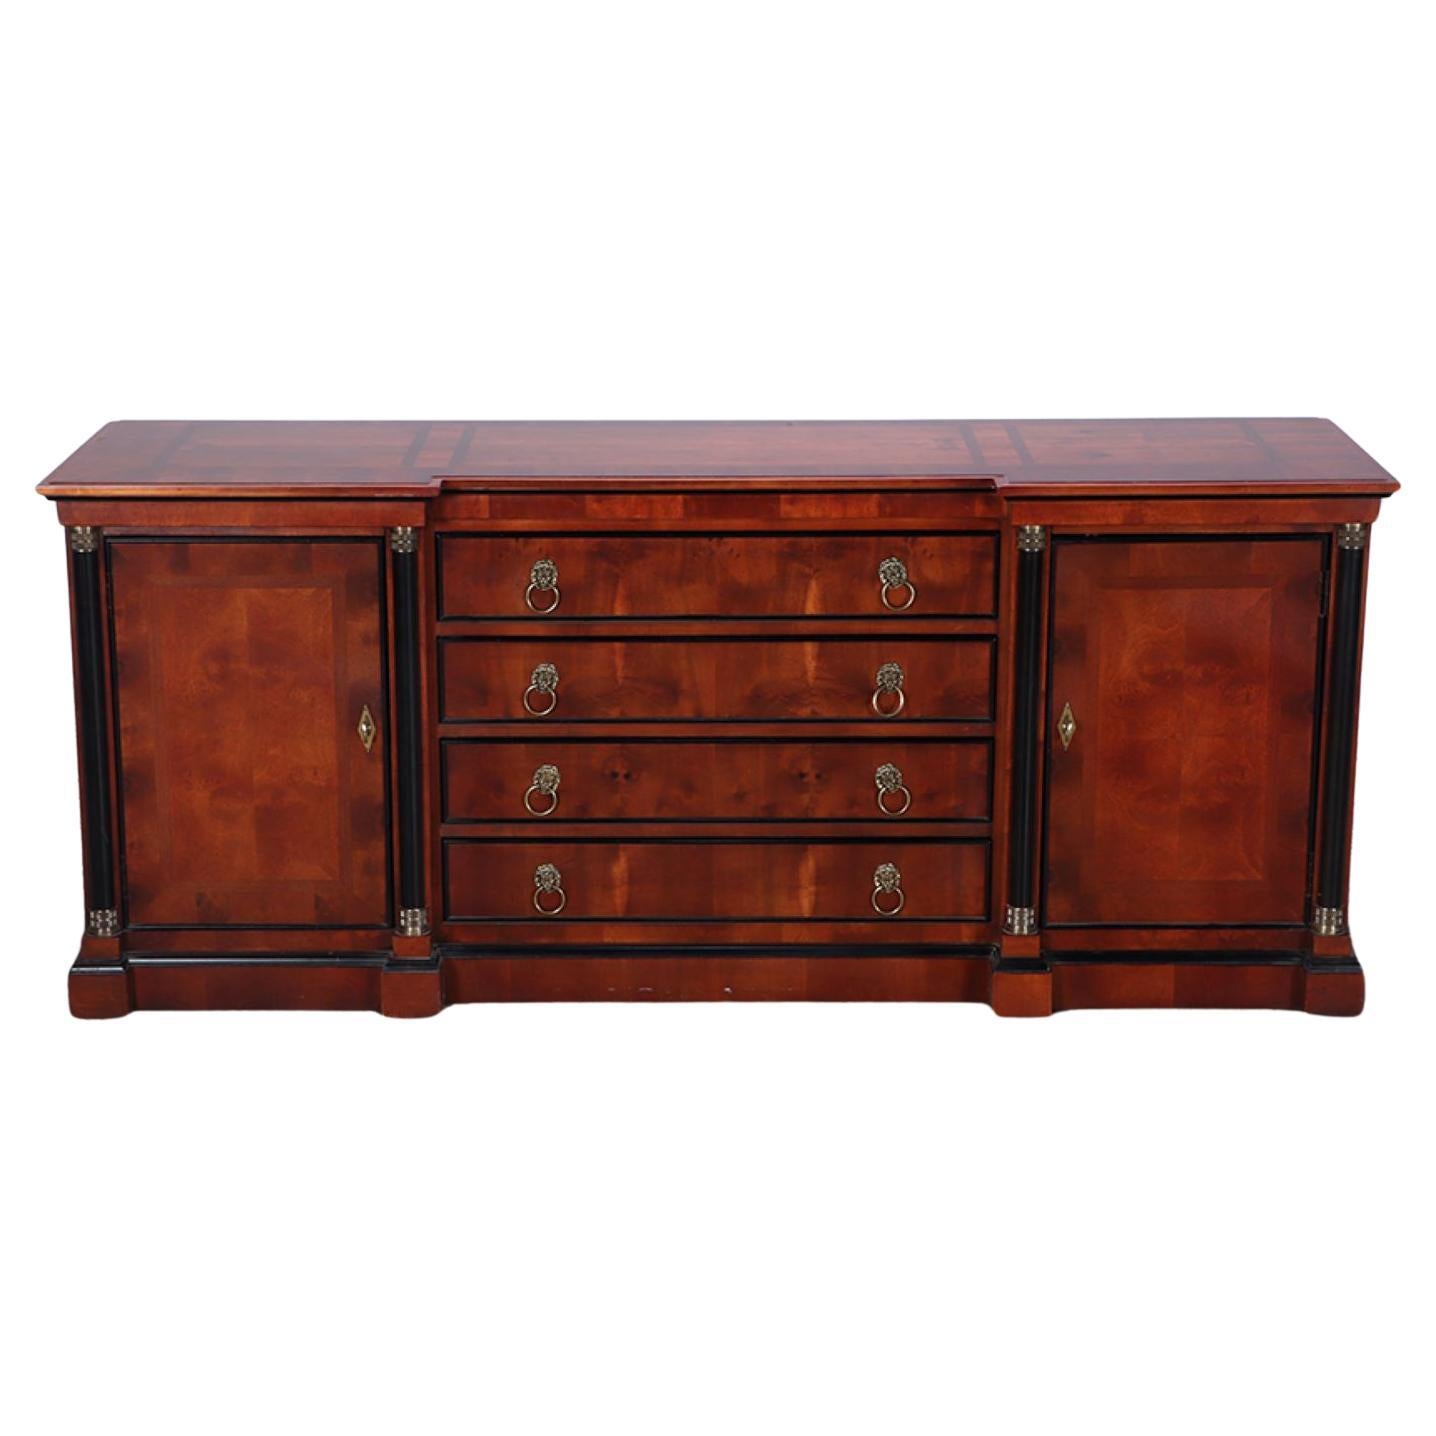 A Yew wood Empire style sideboard or credenza by Century.